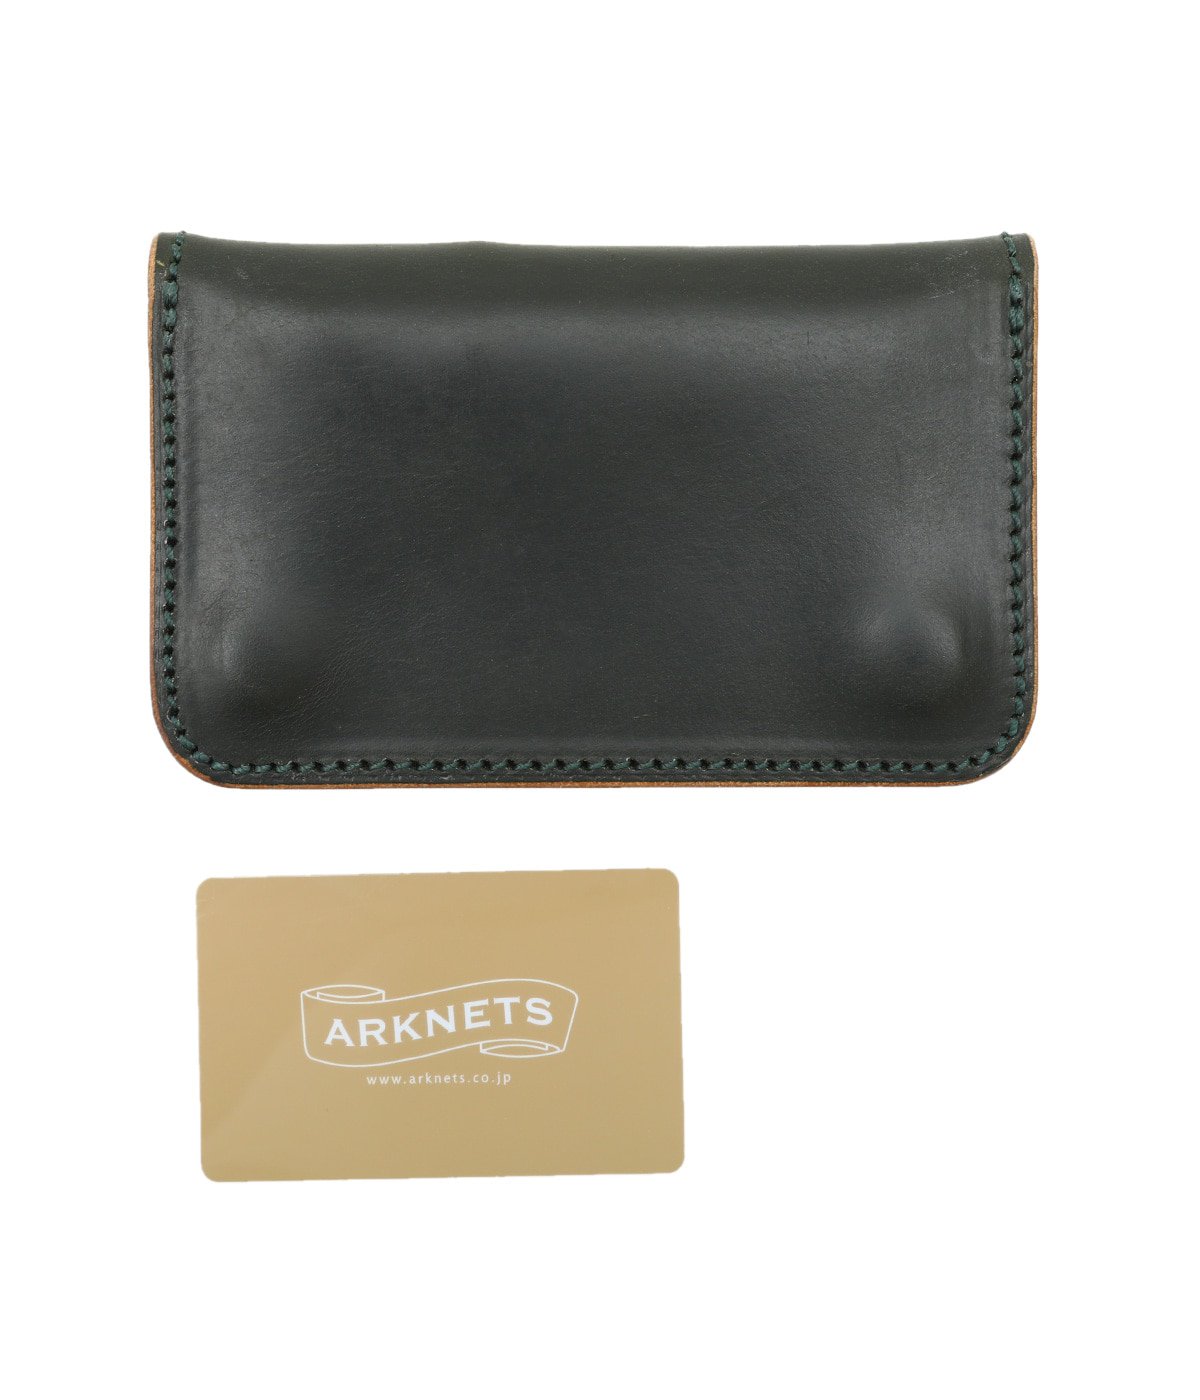 LIMITED TRUCKERS WALLET SMALL   LARRY SMITHラリースミス